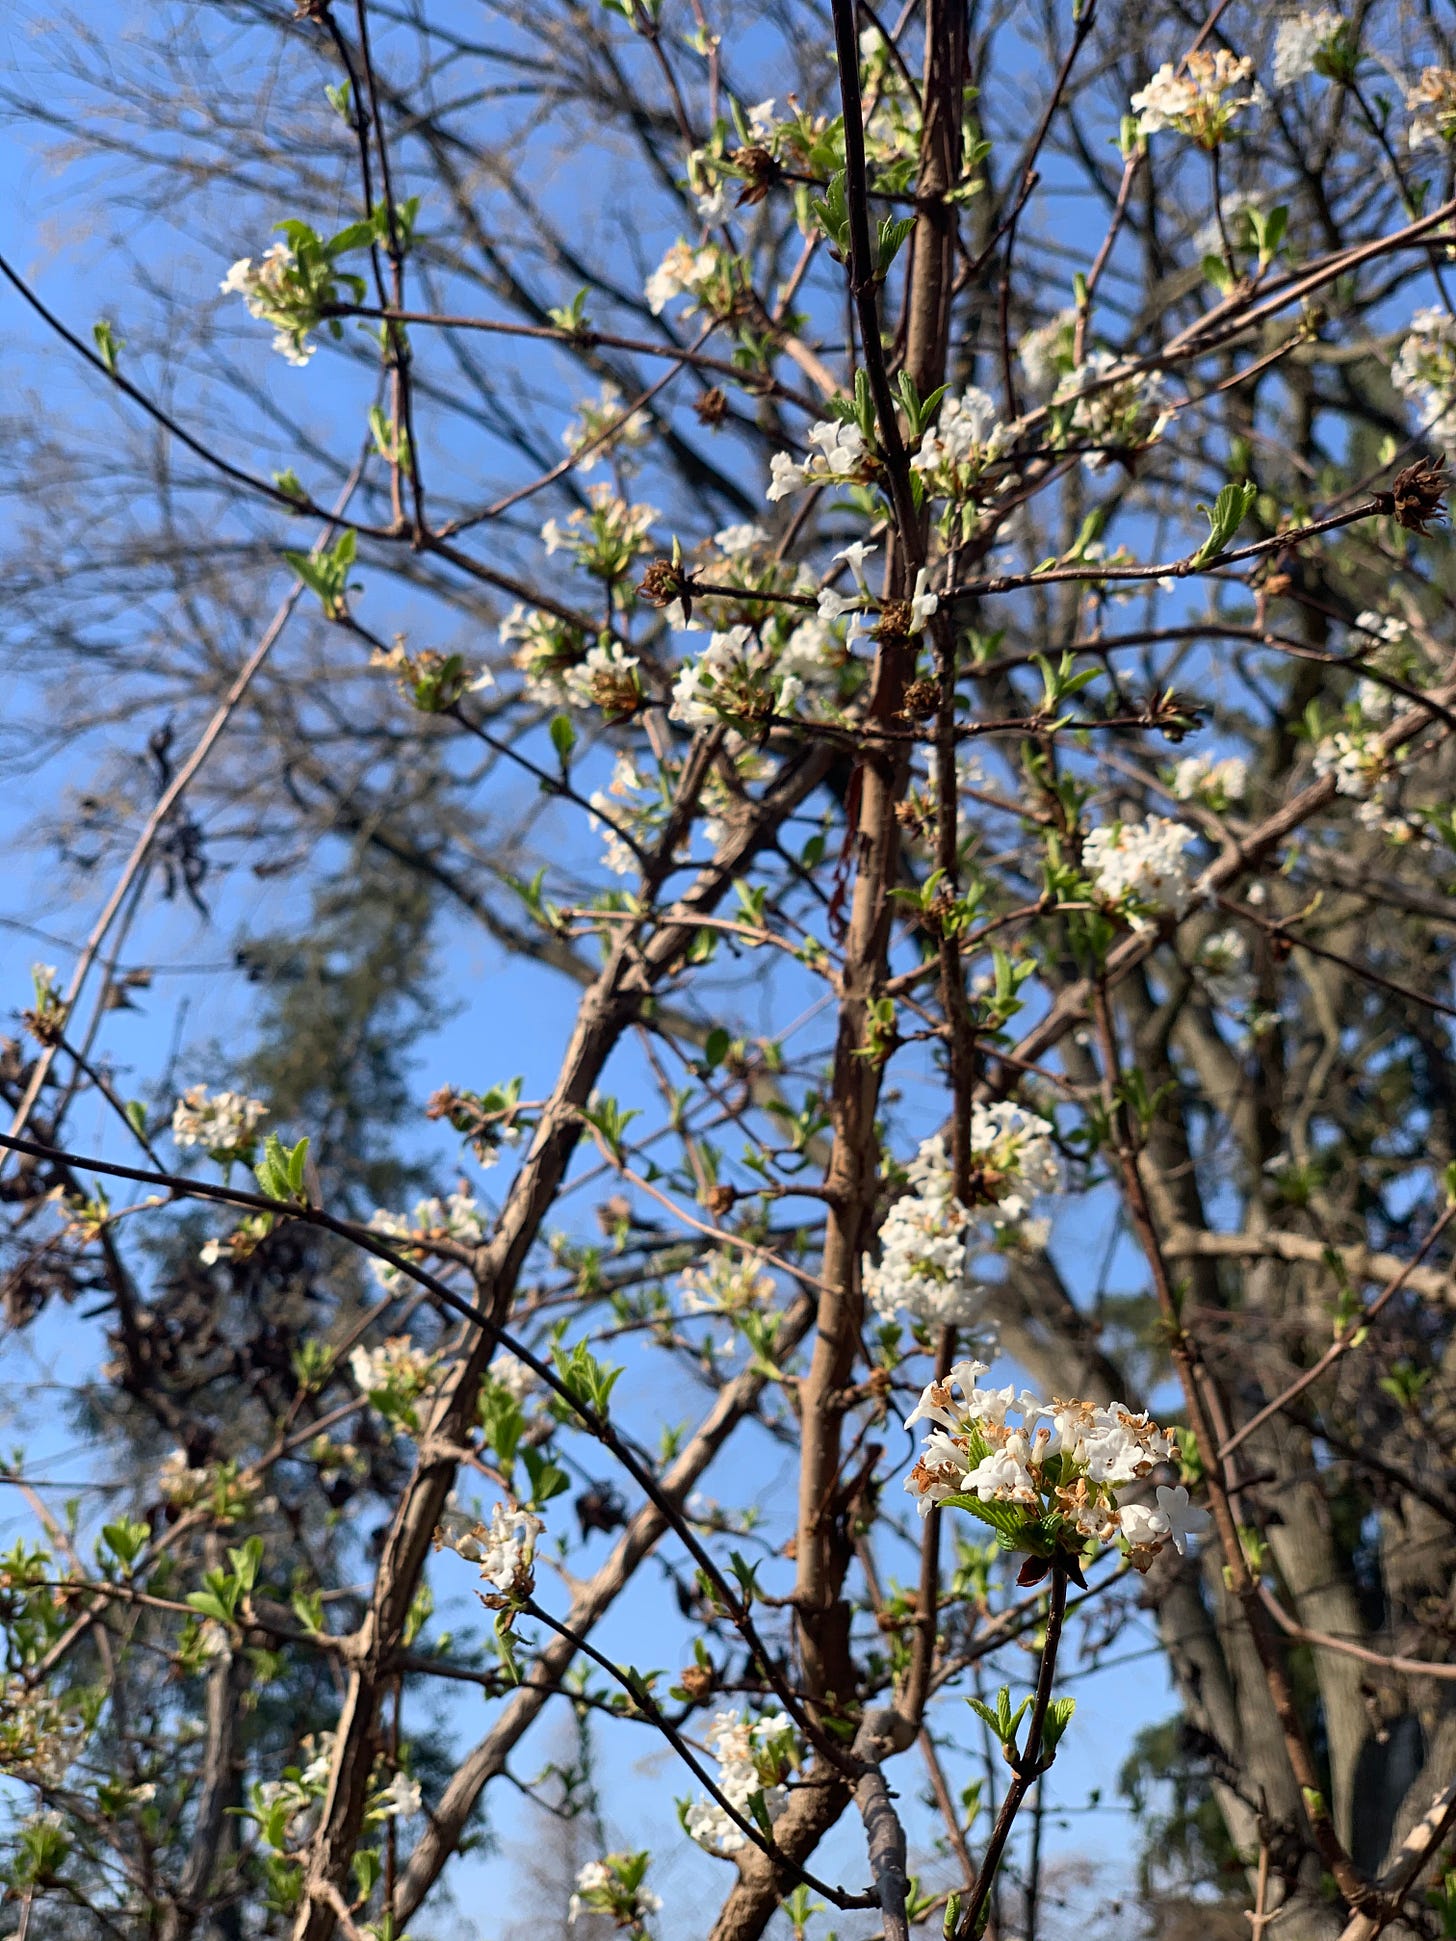 brown branches against a bright blue sky with small white flowers starting to bloom